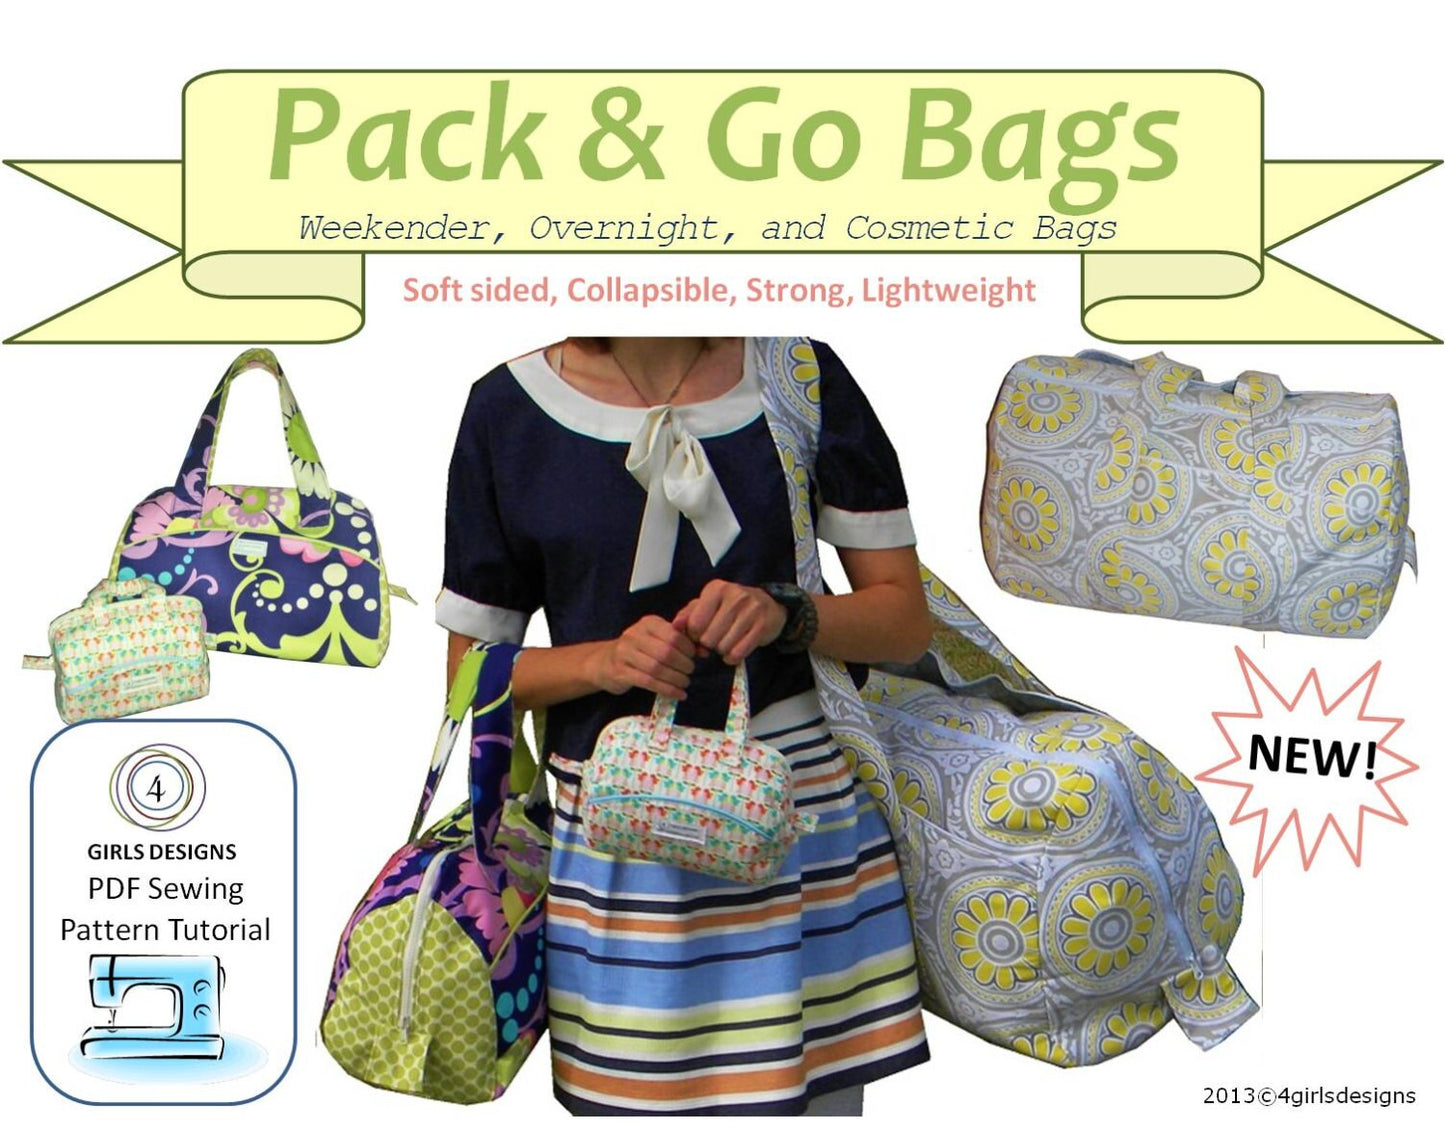 Travel Bag Sewing Pattern PDF Instant Download for New Pack and Go Bags. Soft Sided, Collapsible, Strong and Lightweight Bags in Three Sizes